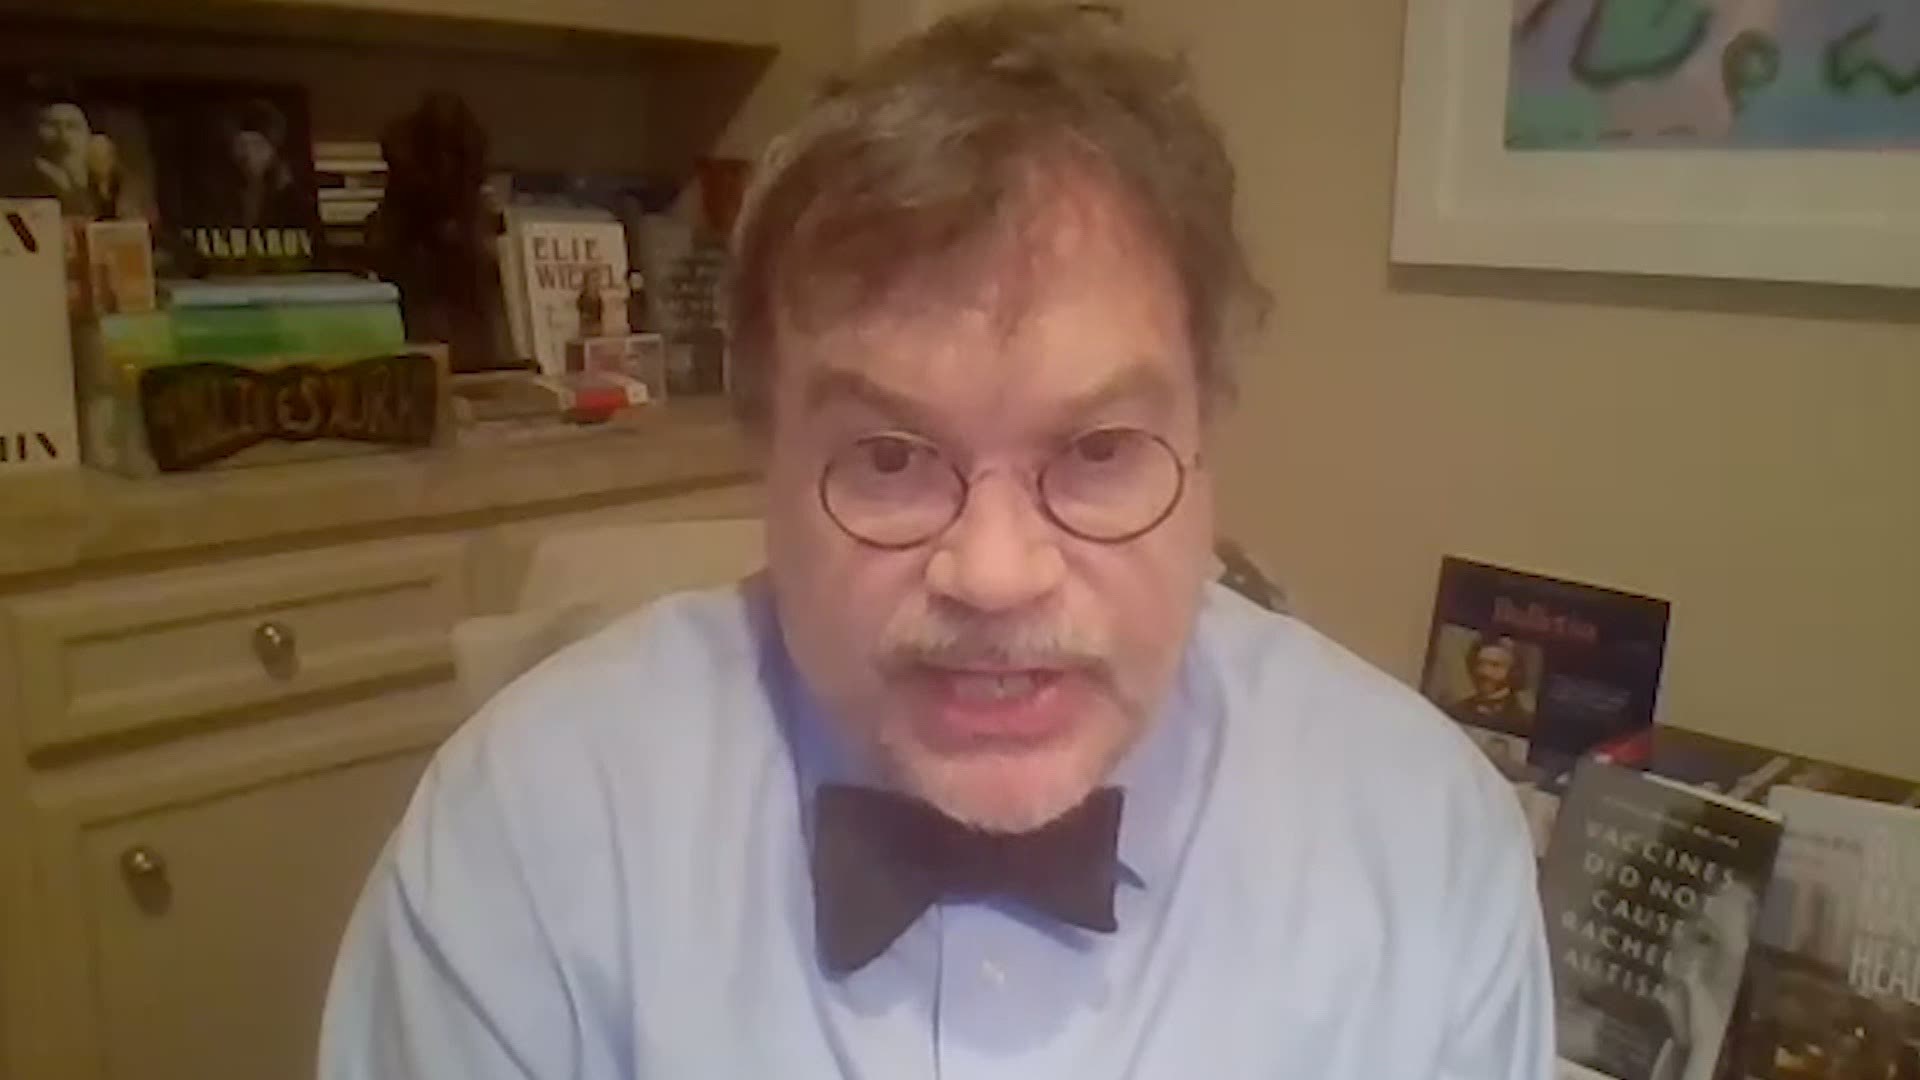 Dr. Peter Hotez said the president's plan for 100 million shots in 100 days is "not adequate" and says the country needs to be vaccinating 3 million people per day.